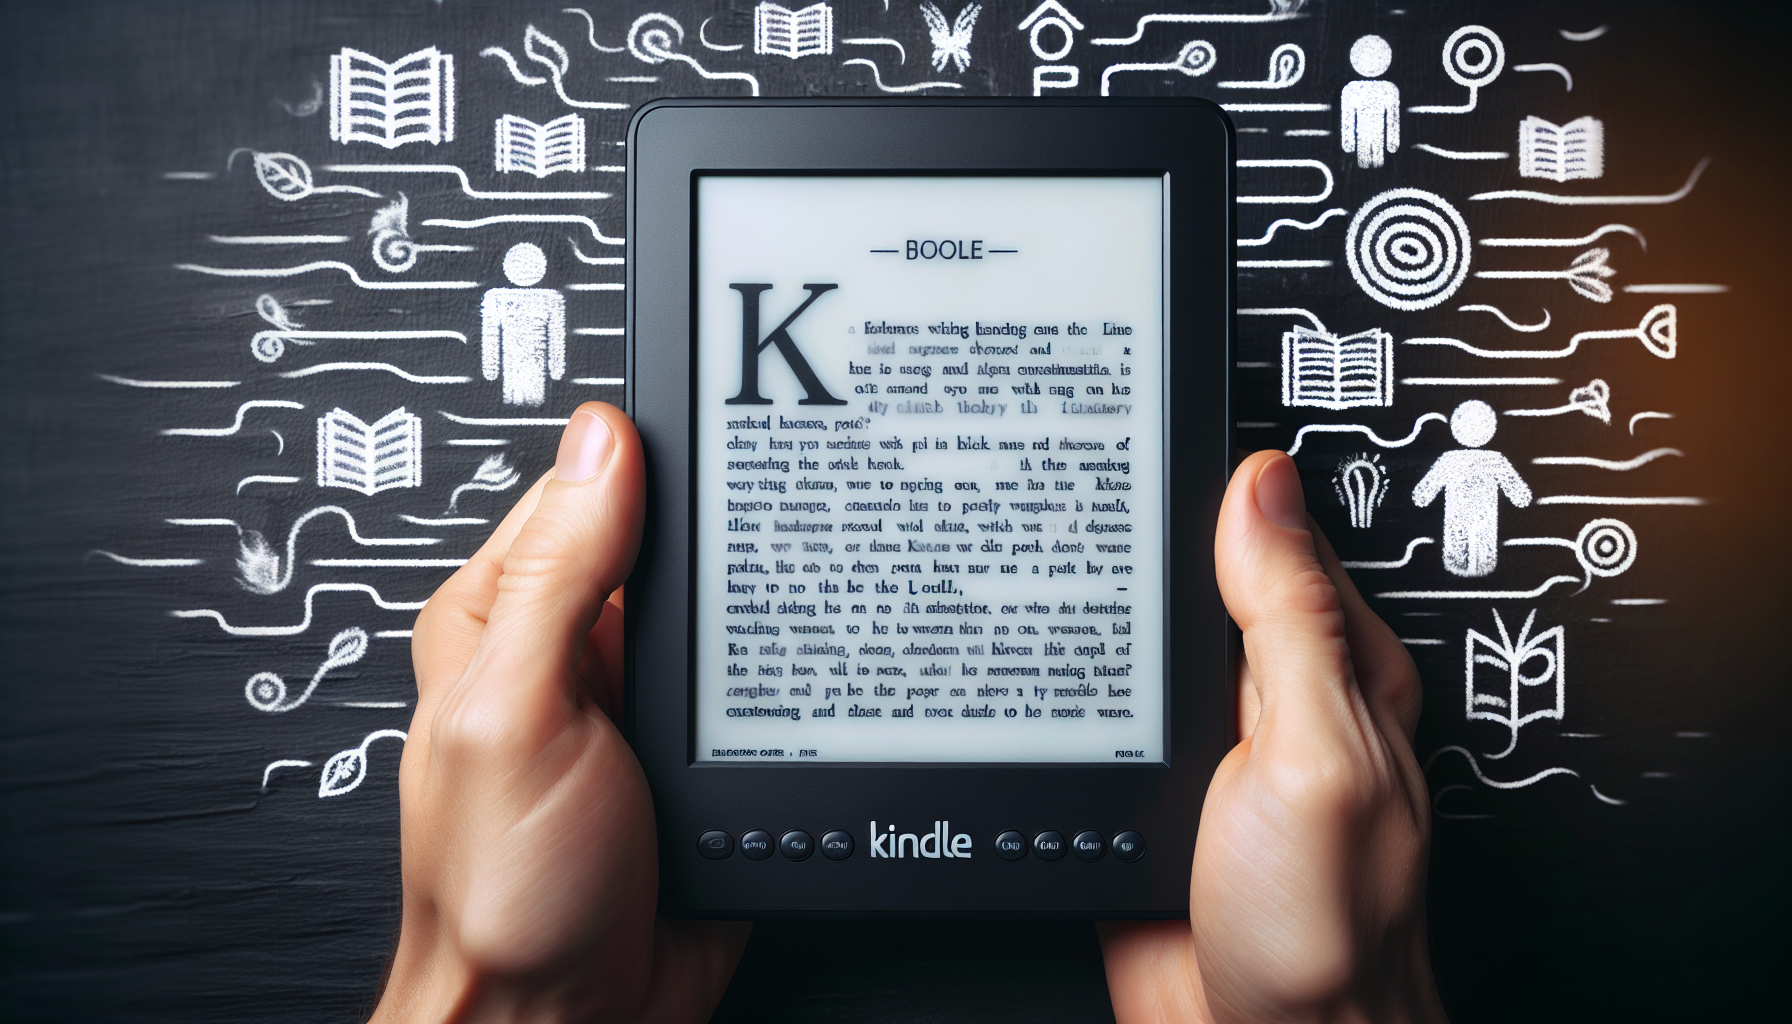 Customizing text size and layout on Kindle